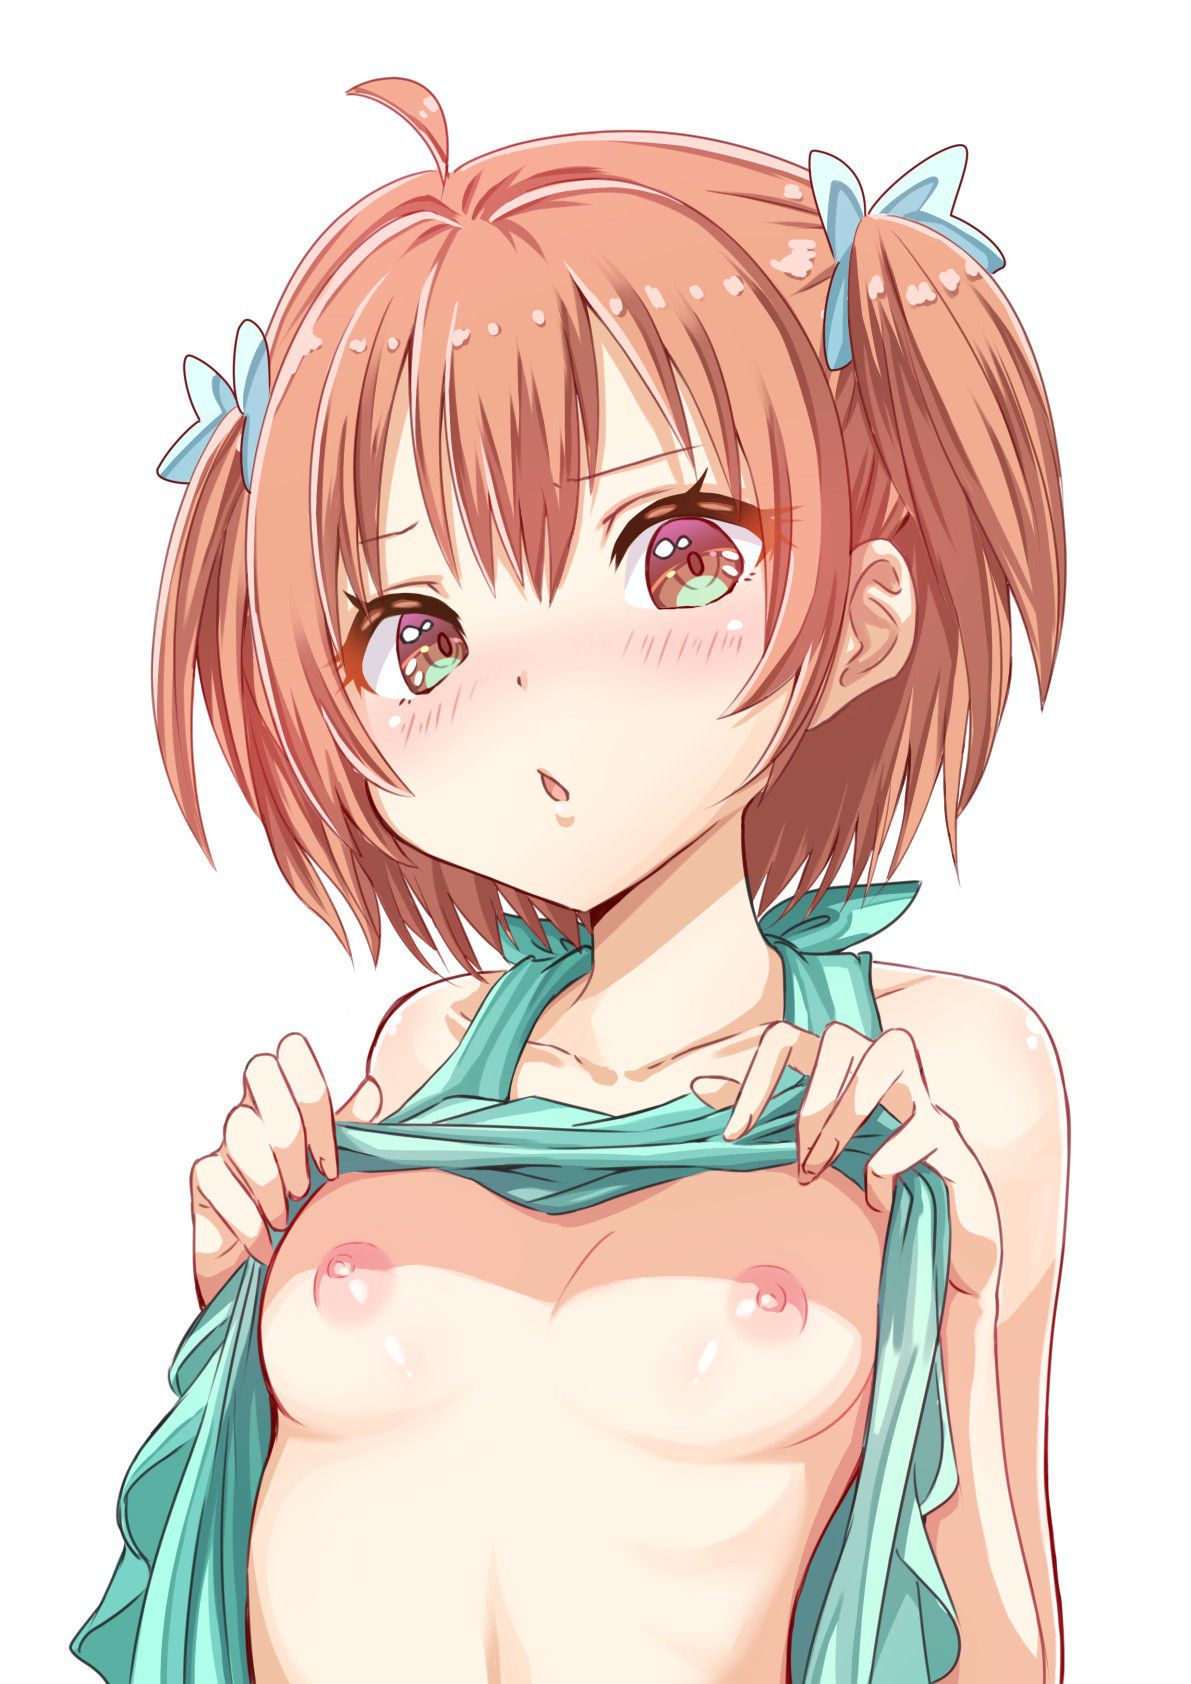 【Secondary erotic】 Here is the erotic image of a cute girl who will do naughty things while blushing 15